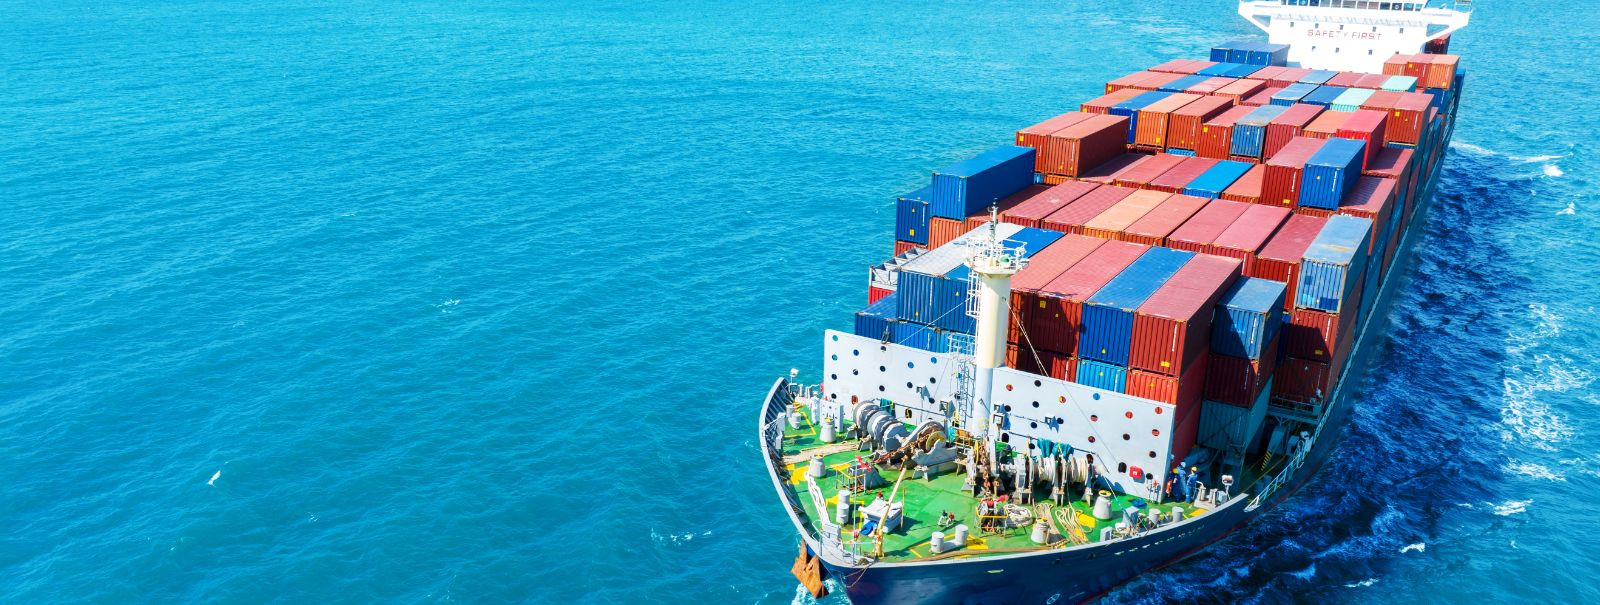 Cargo insurance is a type of insurance policy that protects the shipper against losses that can occur to goods while they are in transit from one place to anoth